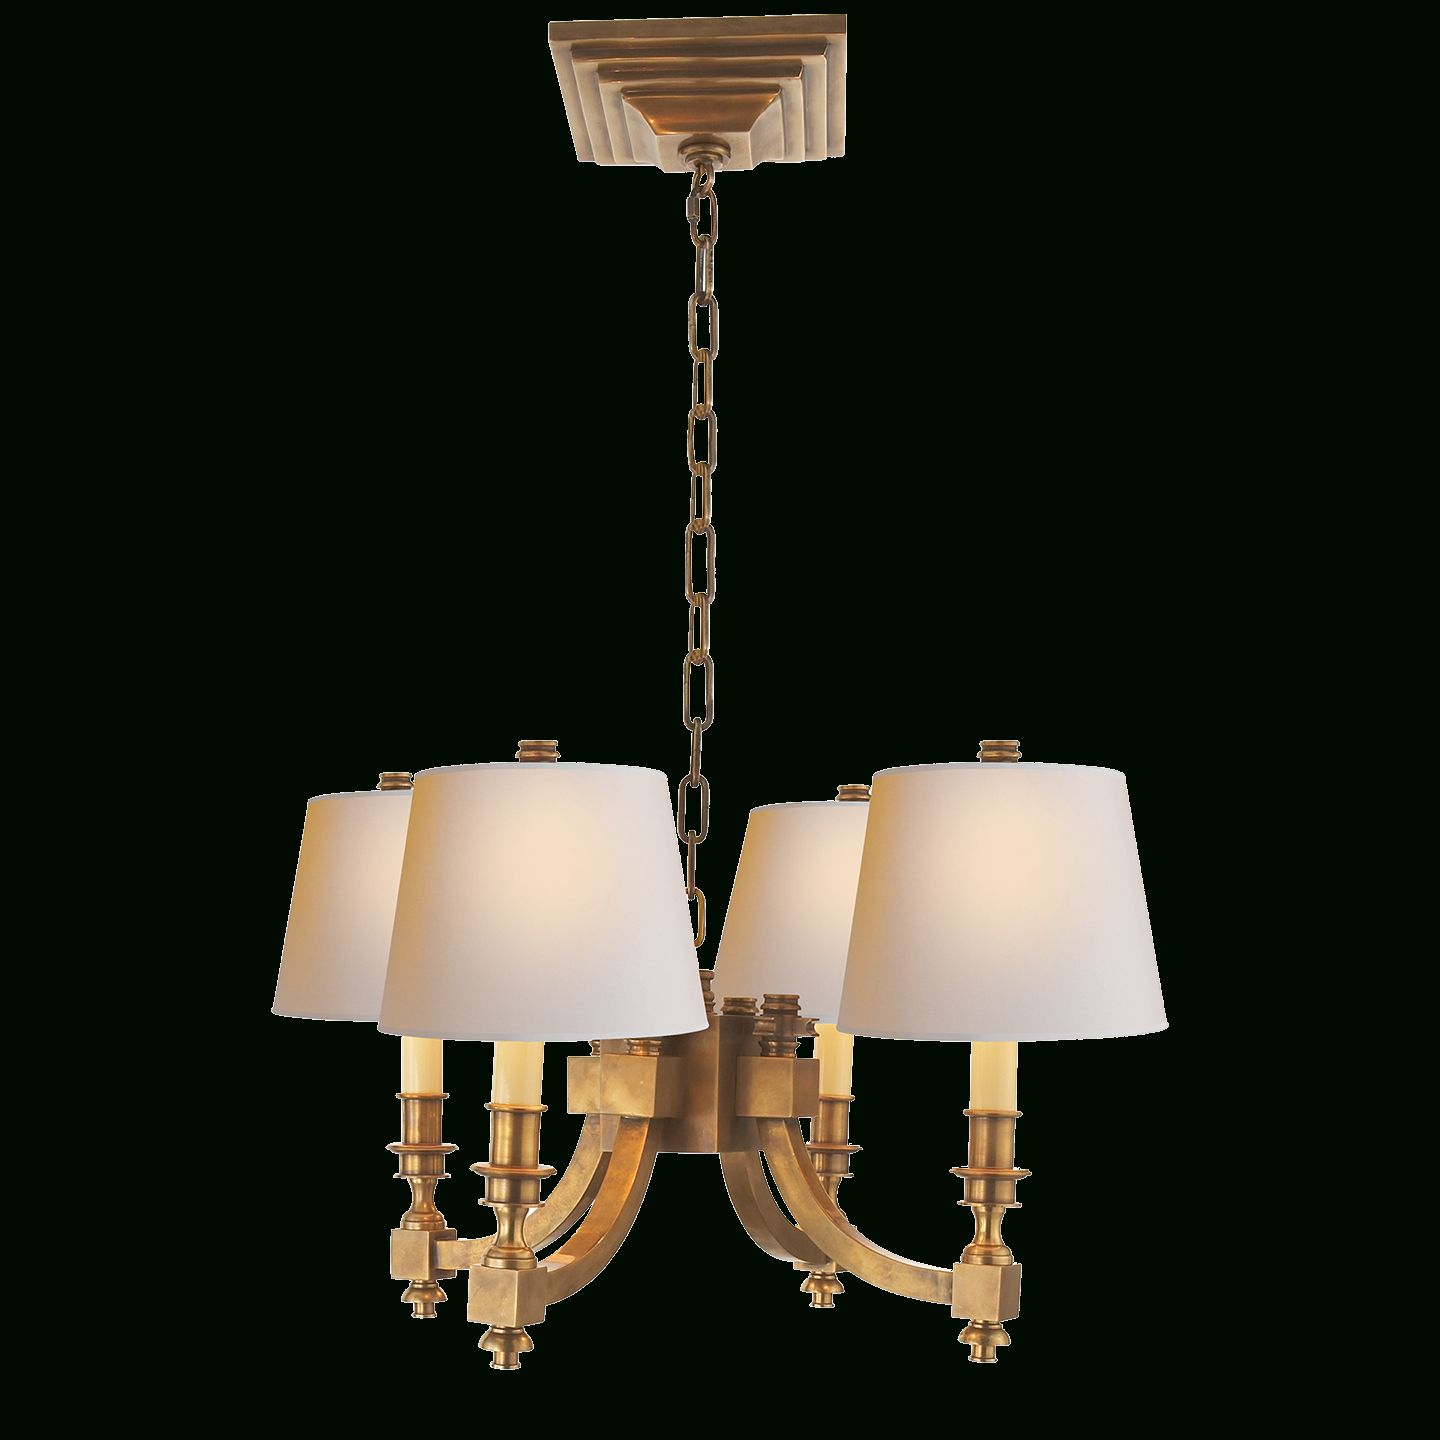 Natural Brass Six Light Chandeliers Intended For Favorite Hand Rubbed Antique Brass With Natural Paper Shades (View 8 of 20)